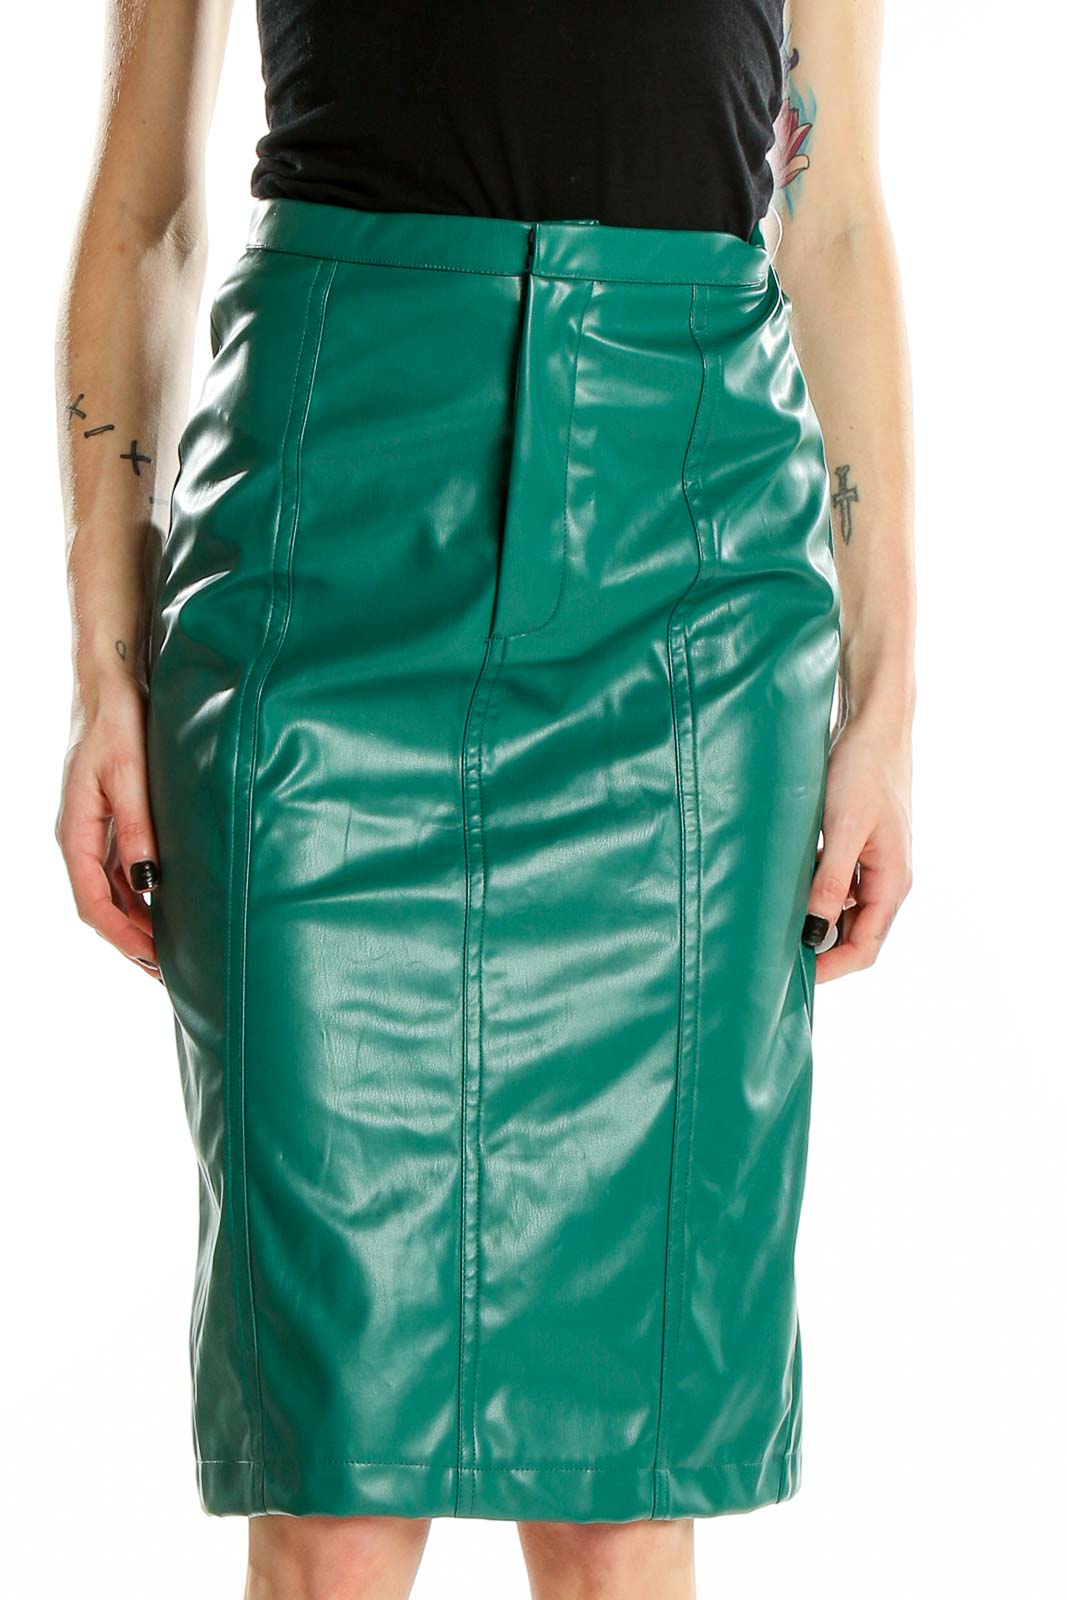 Green Pleather Skirt Front